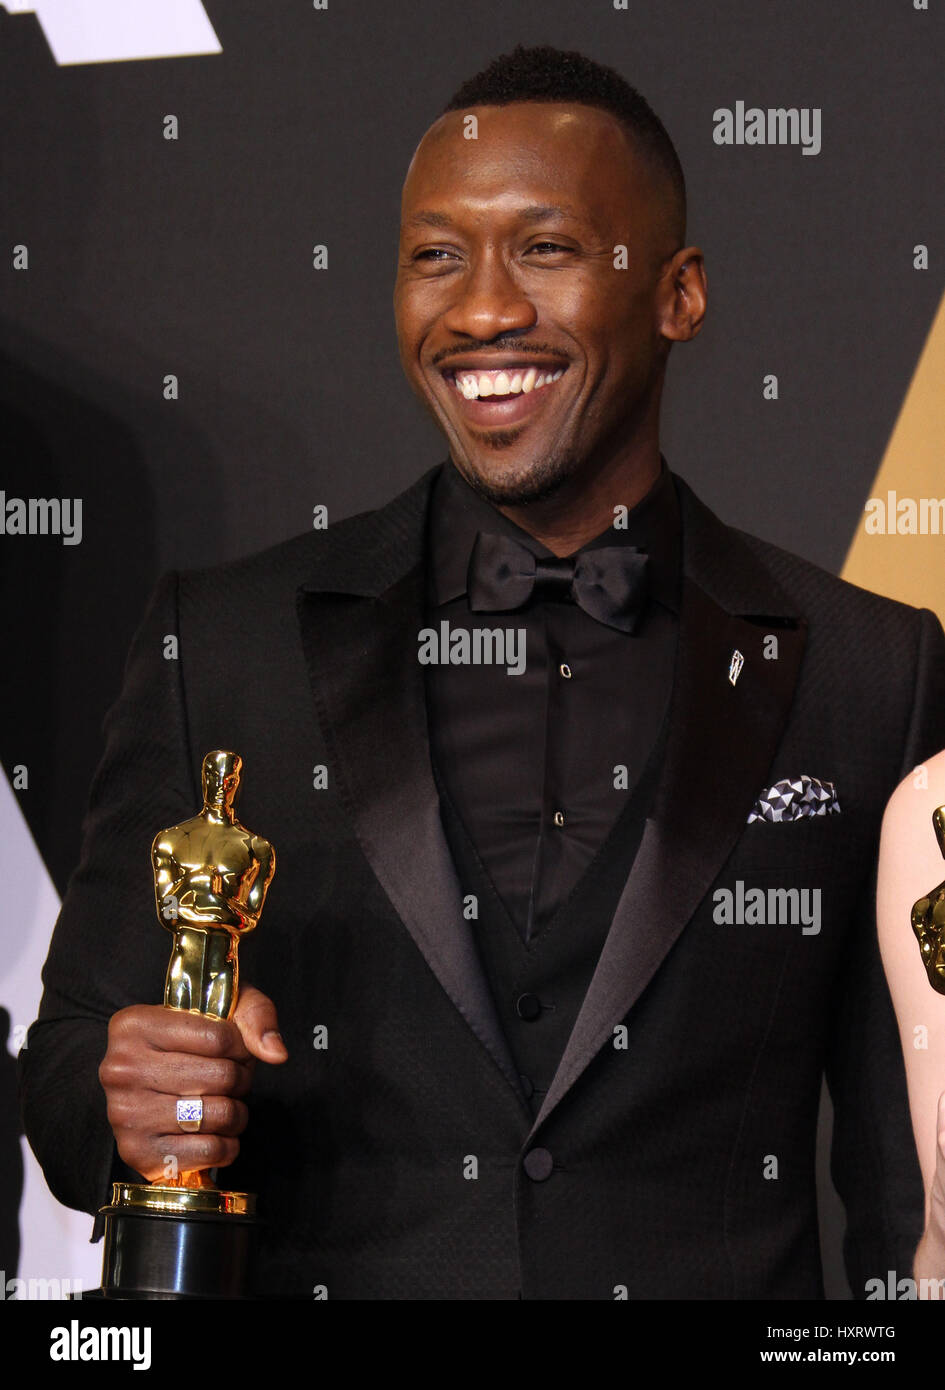 89th Annual Academy Awards (Oscar's) held at the Dolby Theatre - Press Room  Featuring: Mahershala Ali Where: Los Angeles, California, United States When: 26 Feb 2017 Stock Photo